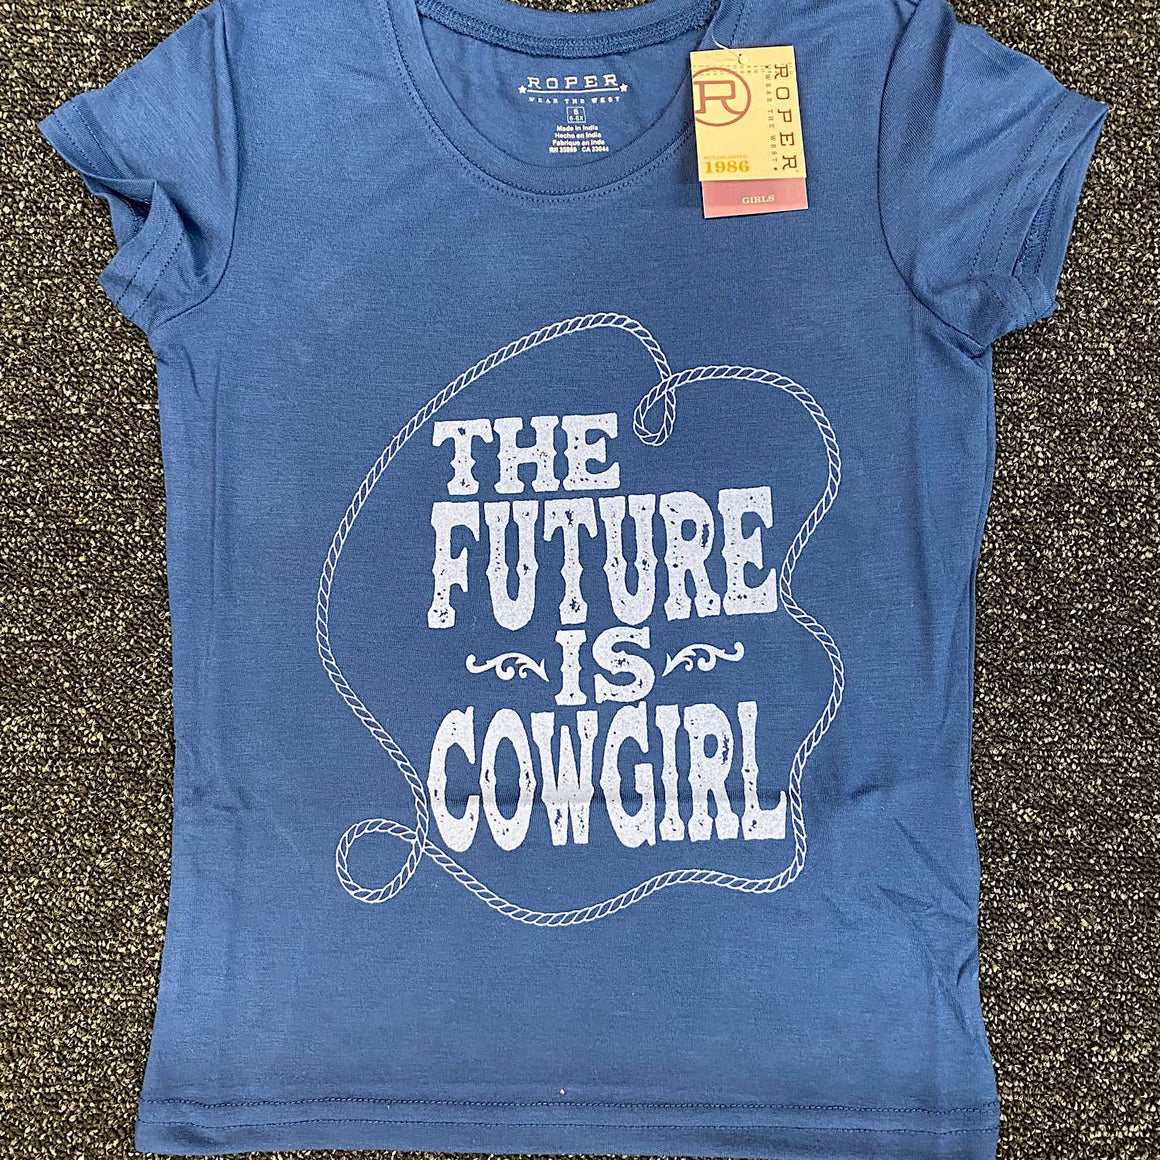 Roper Girls Five Star Collection SS Tee Solid Blue